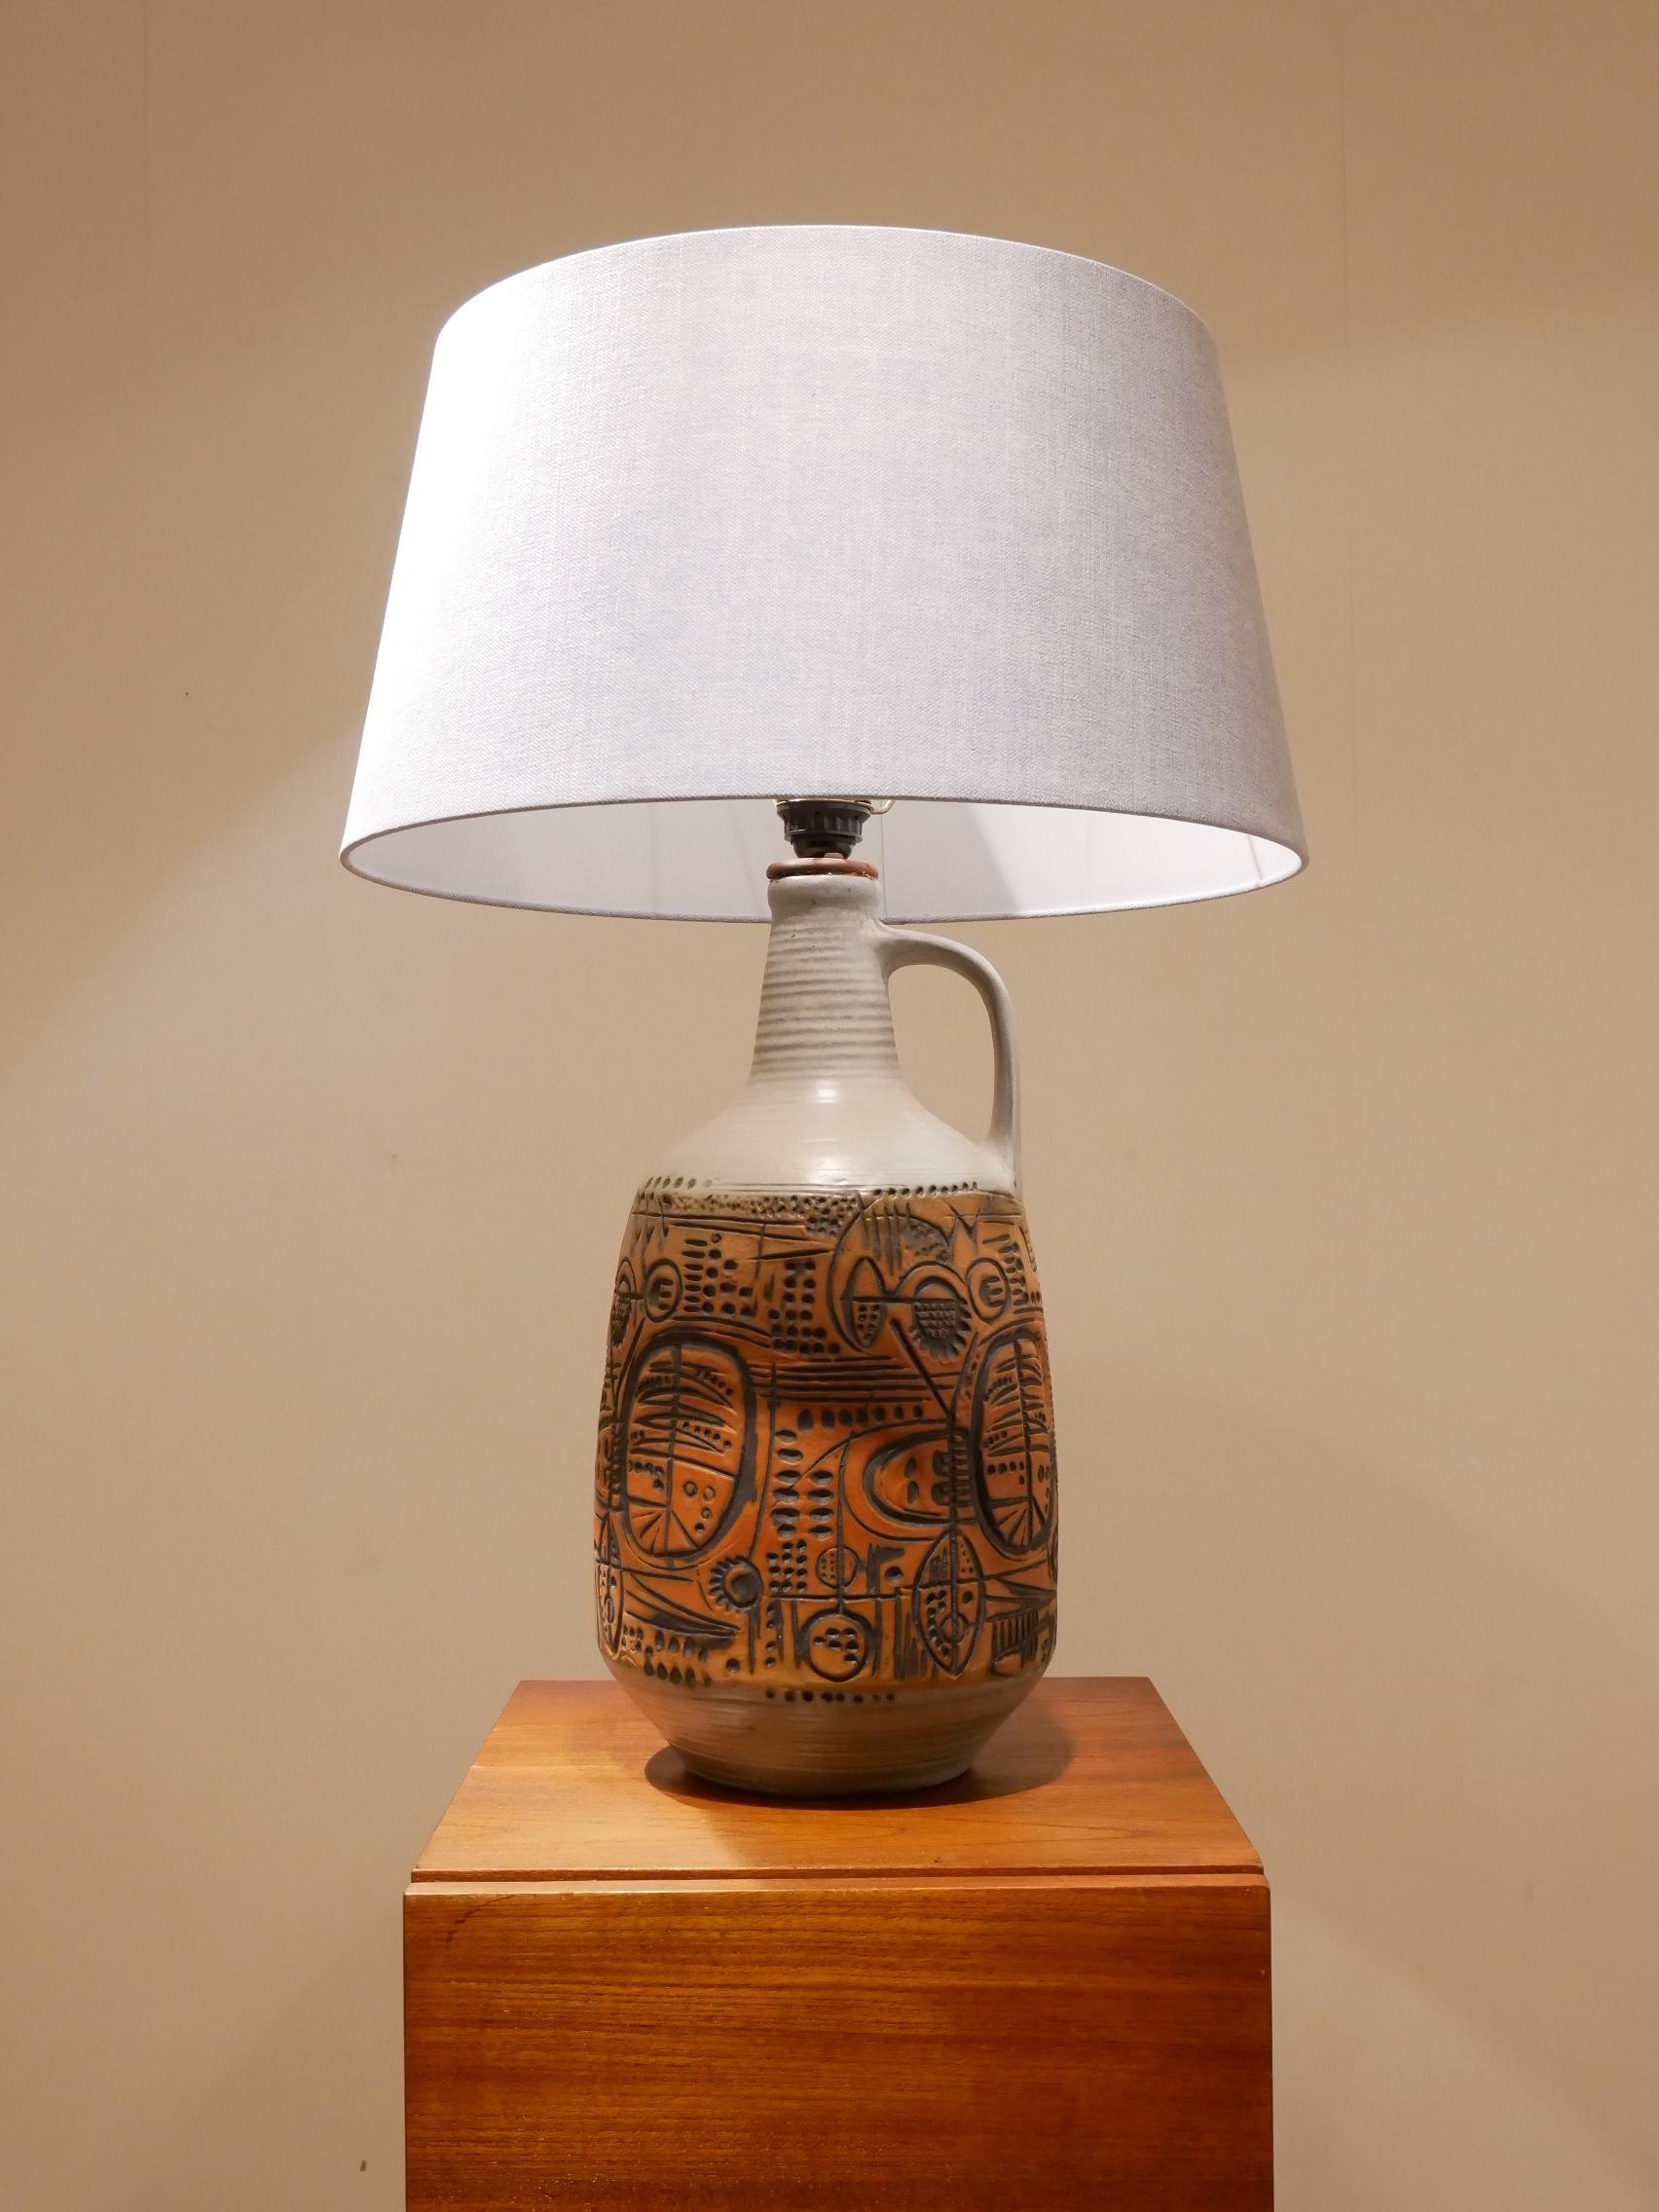 Decorative and colorful extra large sized table lamp from west German brand. Grey blue overglazed ceramic with central rim decorated with brutalist patterns.